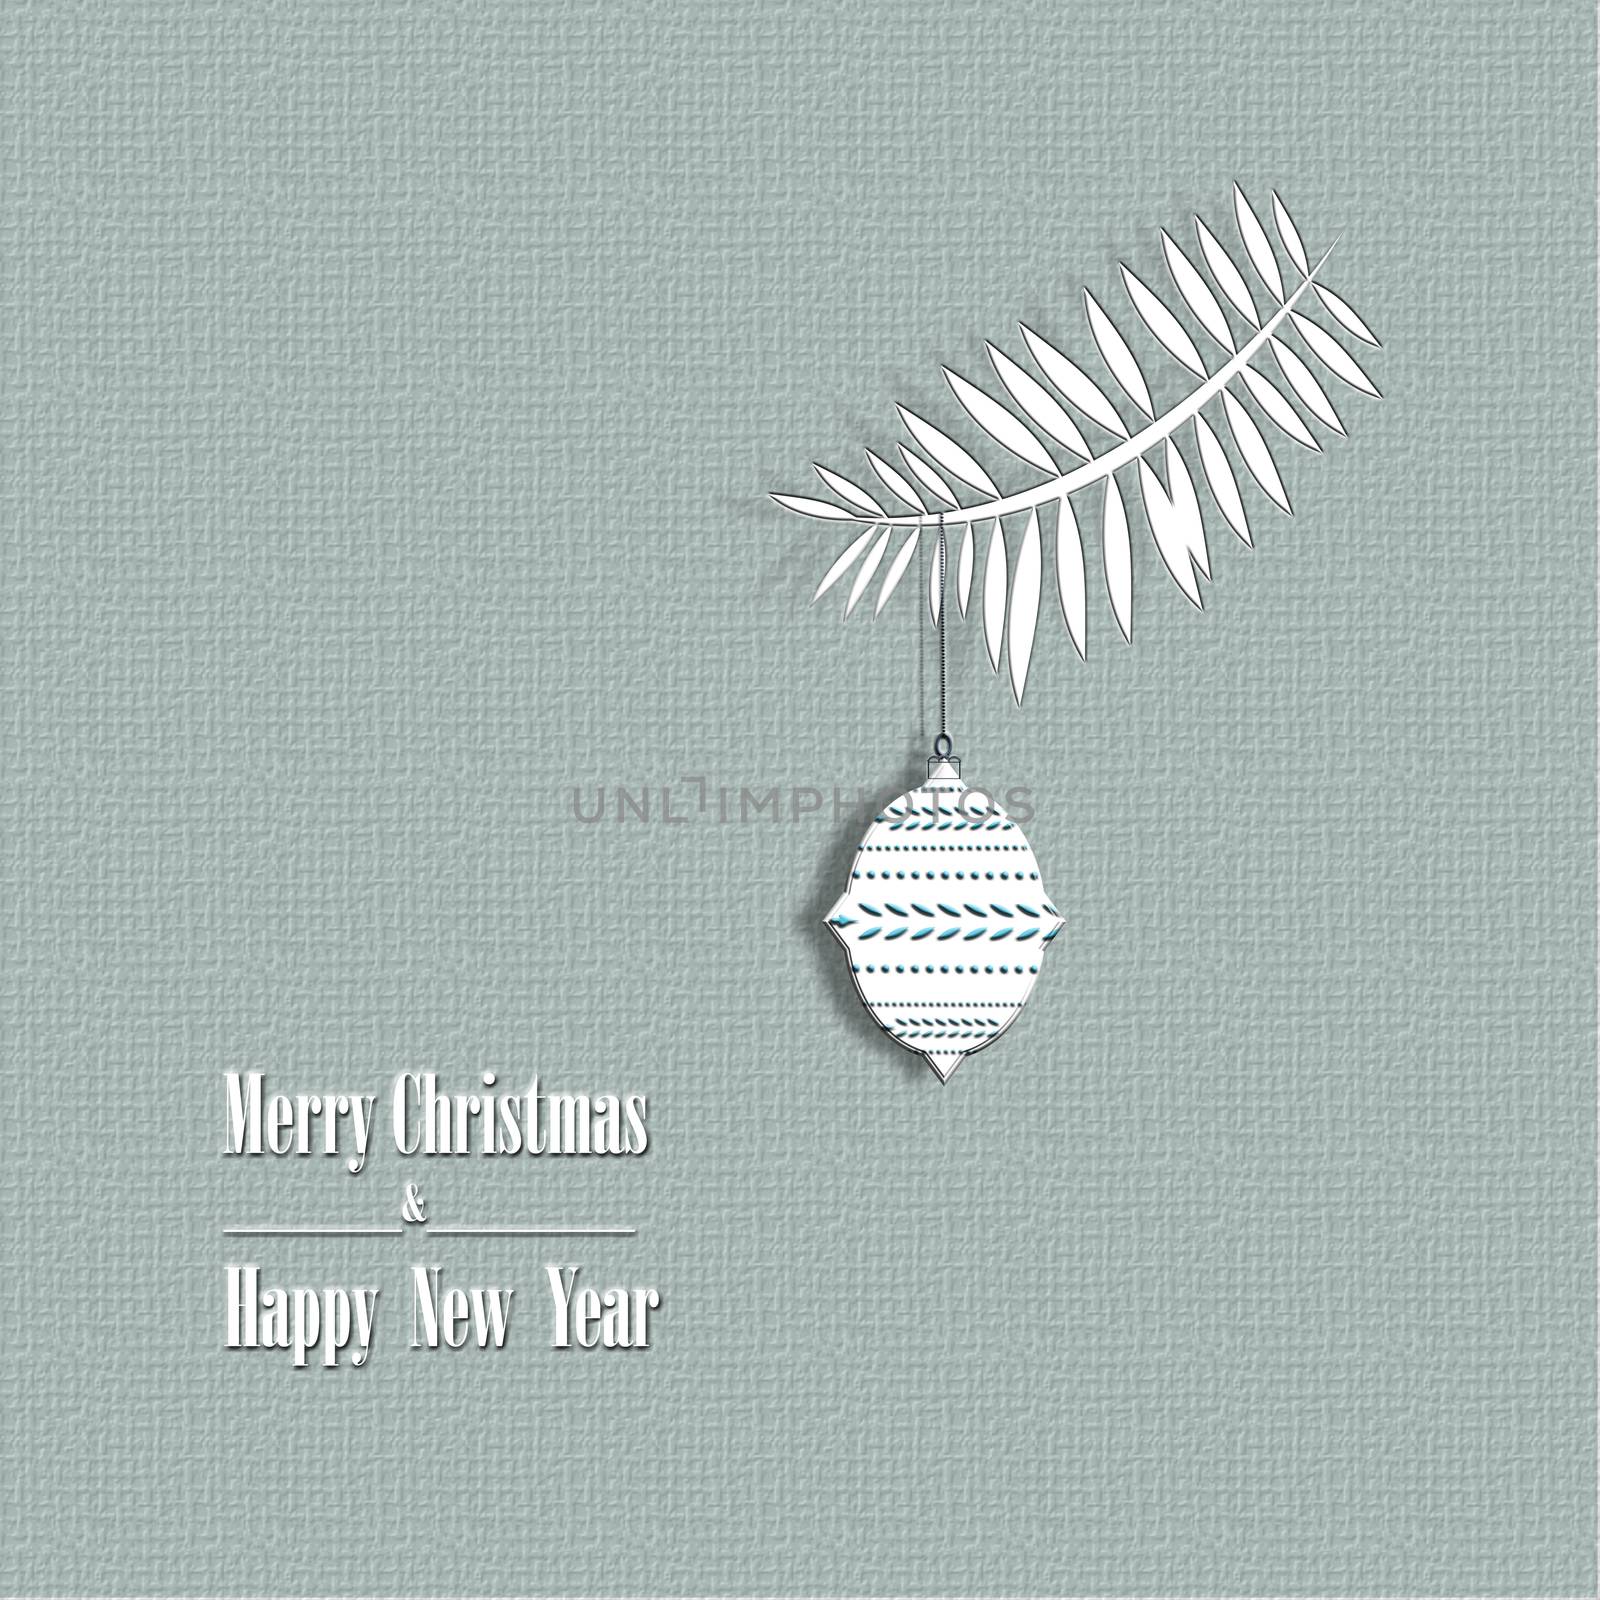 Minimalist pastel christmas card with christmas decoration ball and brunch of abstract tree and text Merry Christmas and Happy New Year. 3D illustration. invitation card